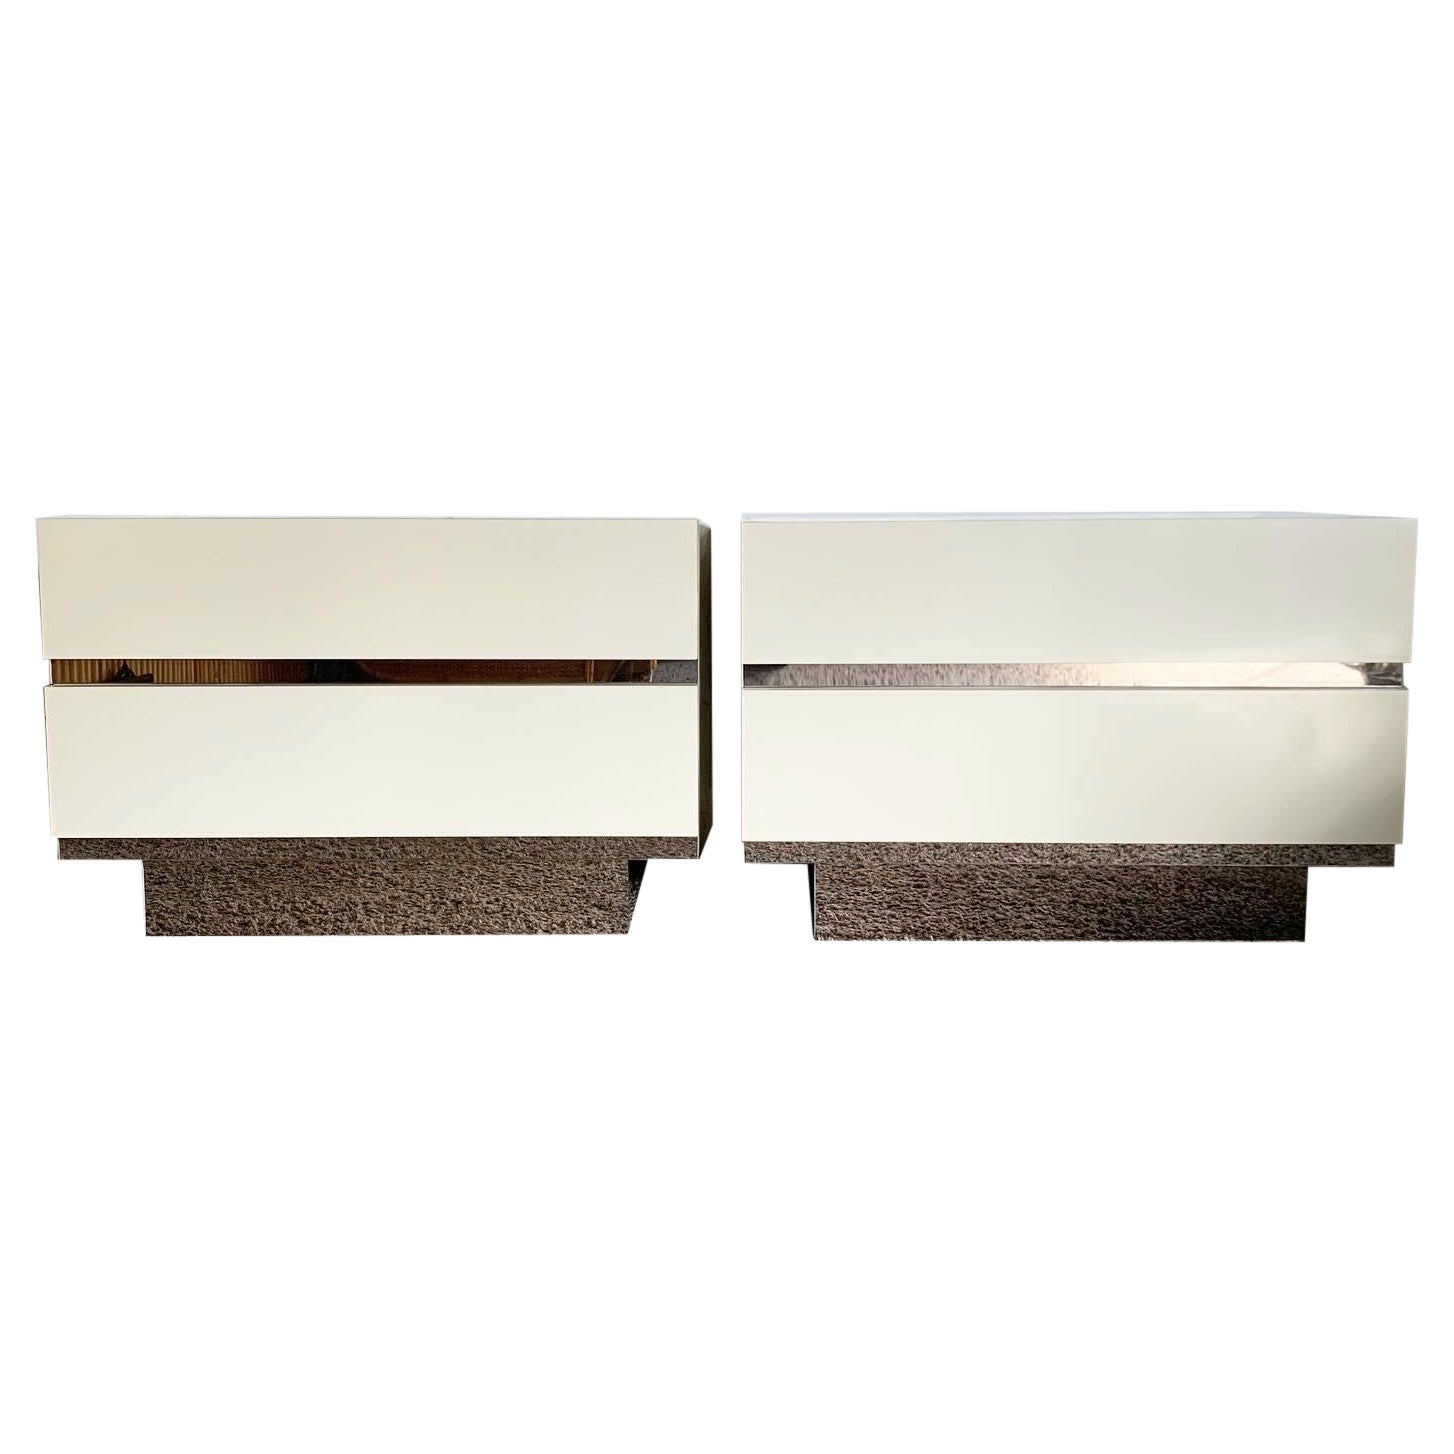 Postmodern Cream Lacquer Laminate With Glass Mirror Paneling - a Pair